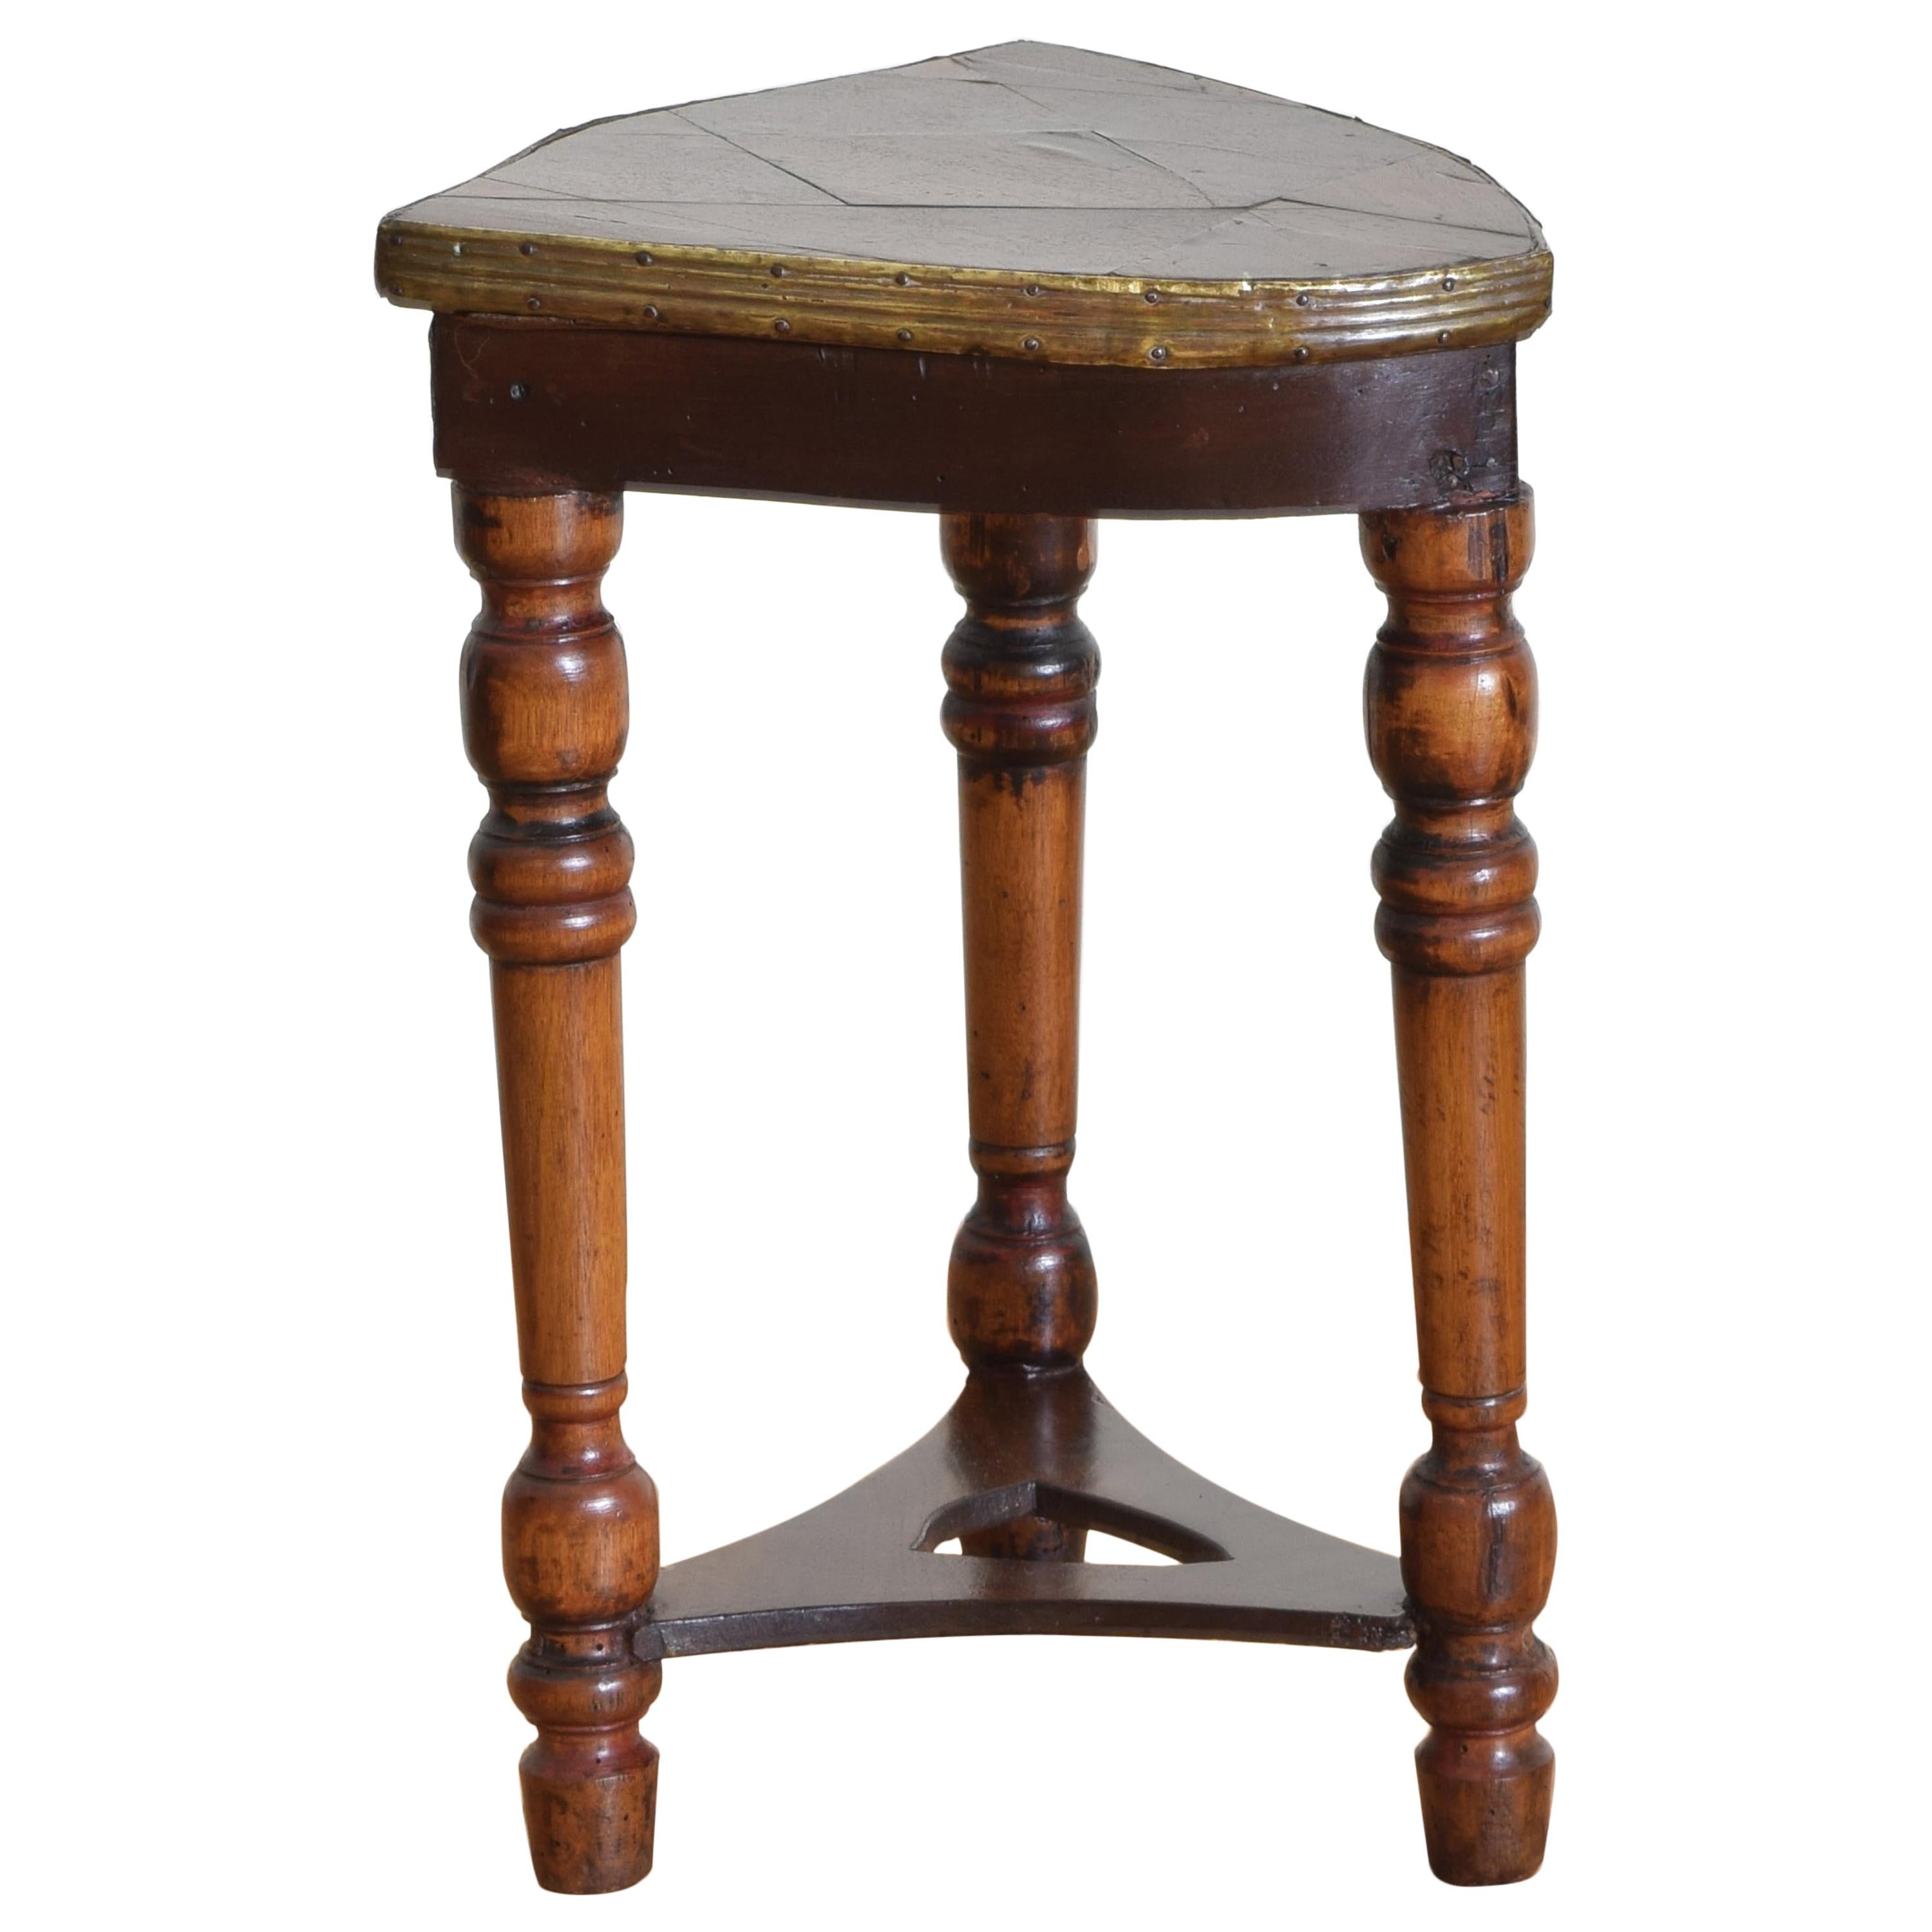 French Walnut and Mixed Woods Shield Form Side Table, Mid-19th Century